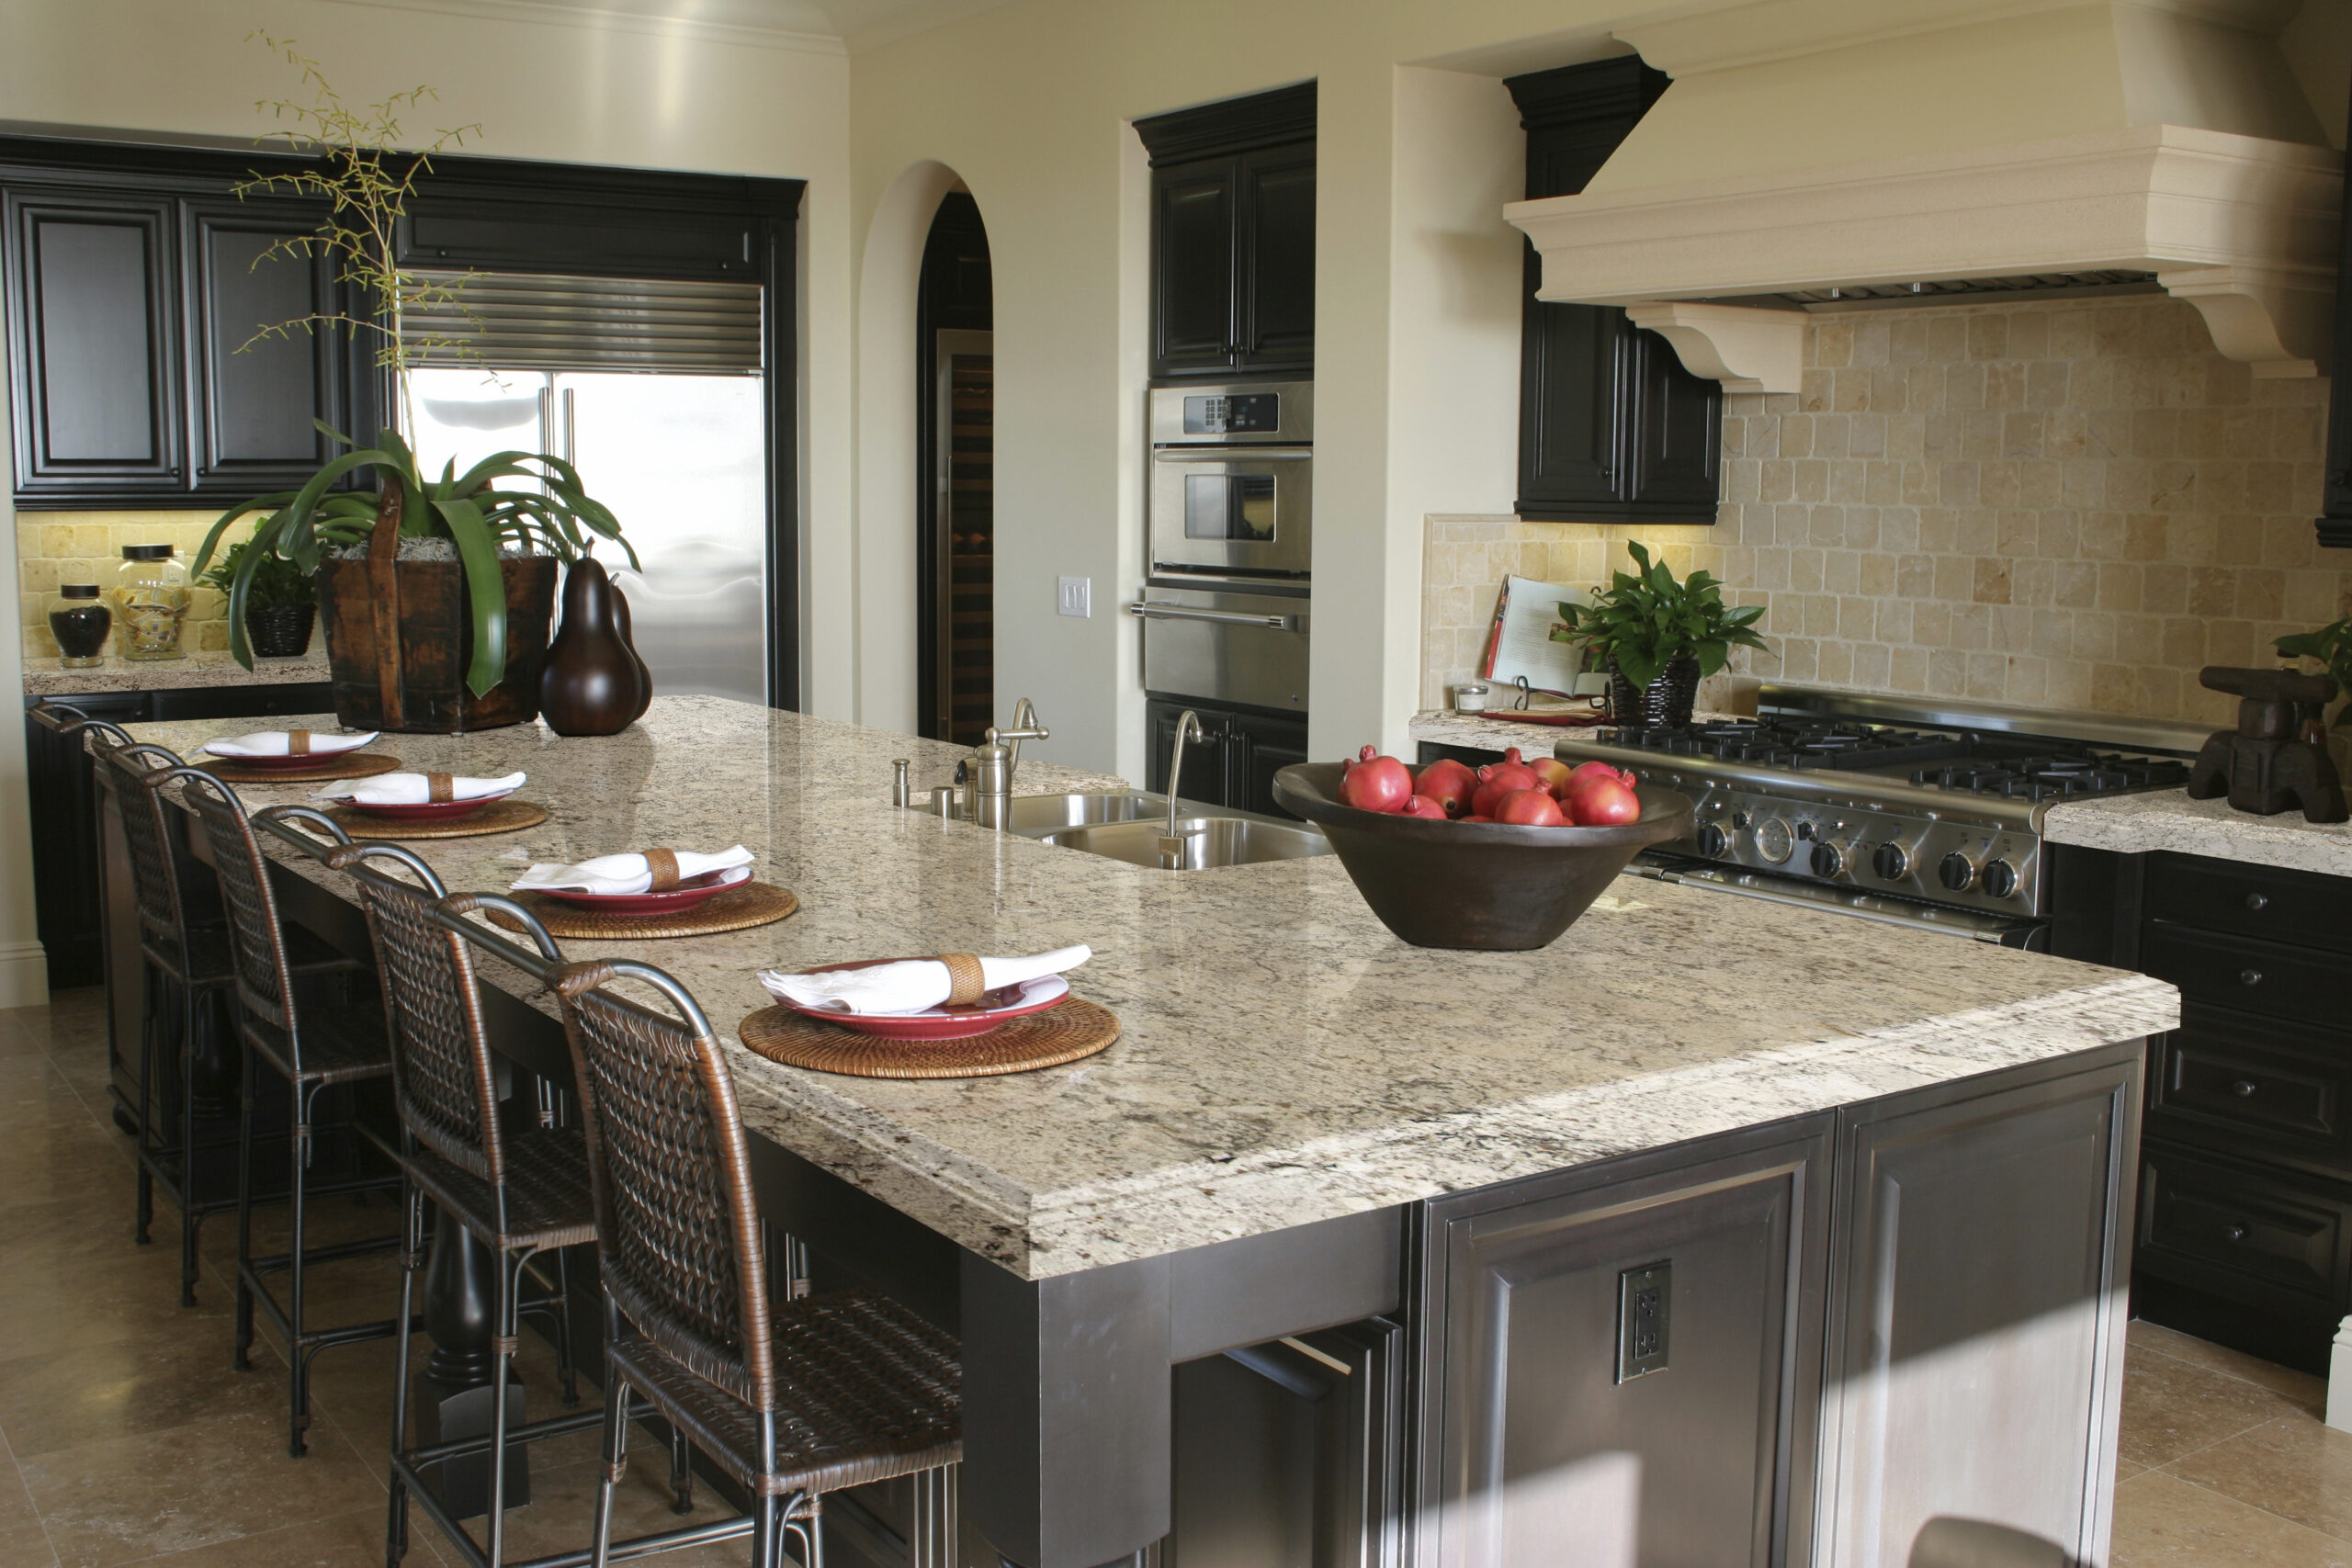 Wrap Up Countertops For Christmas